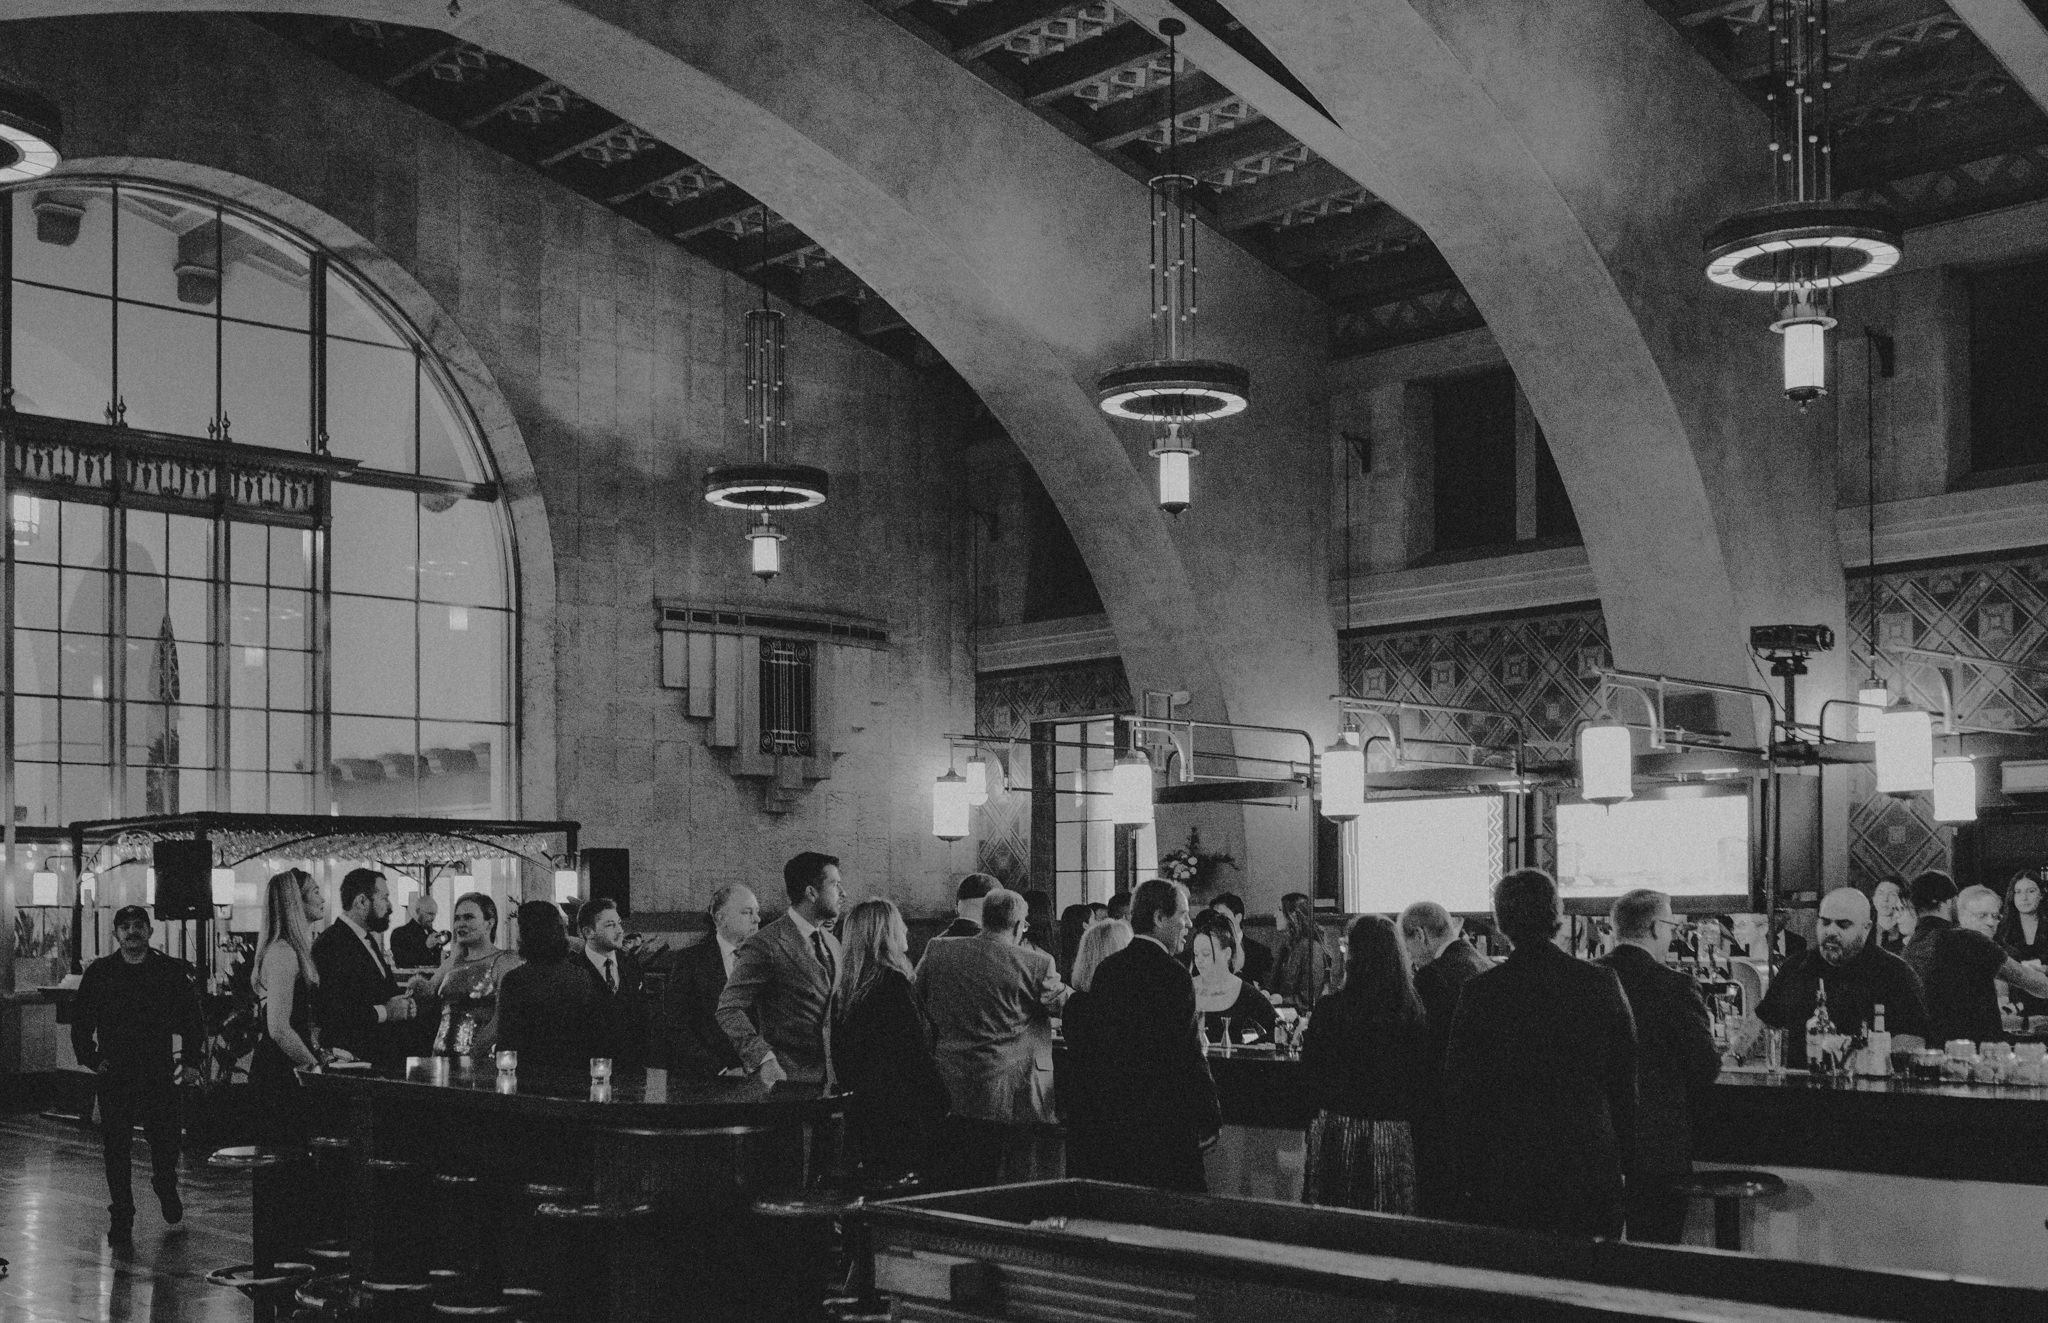 union station home bound brewery wedding - wedding photographers in los angeles - itlaphoto.com-92.jpg